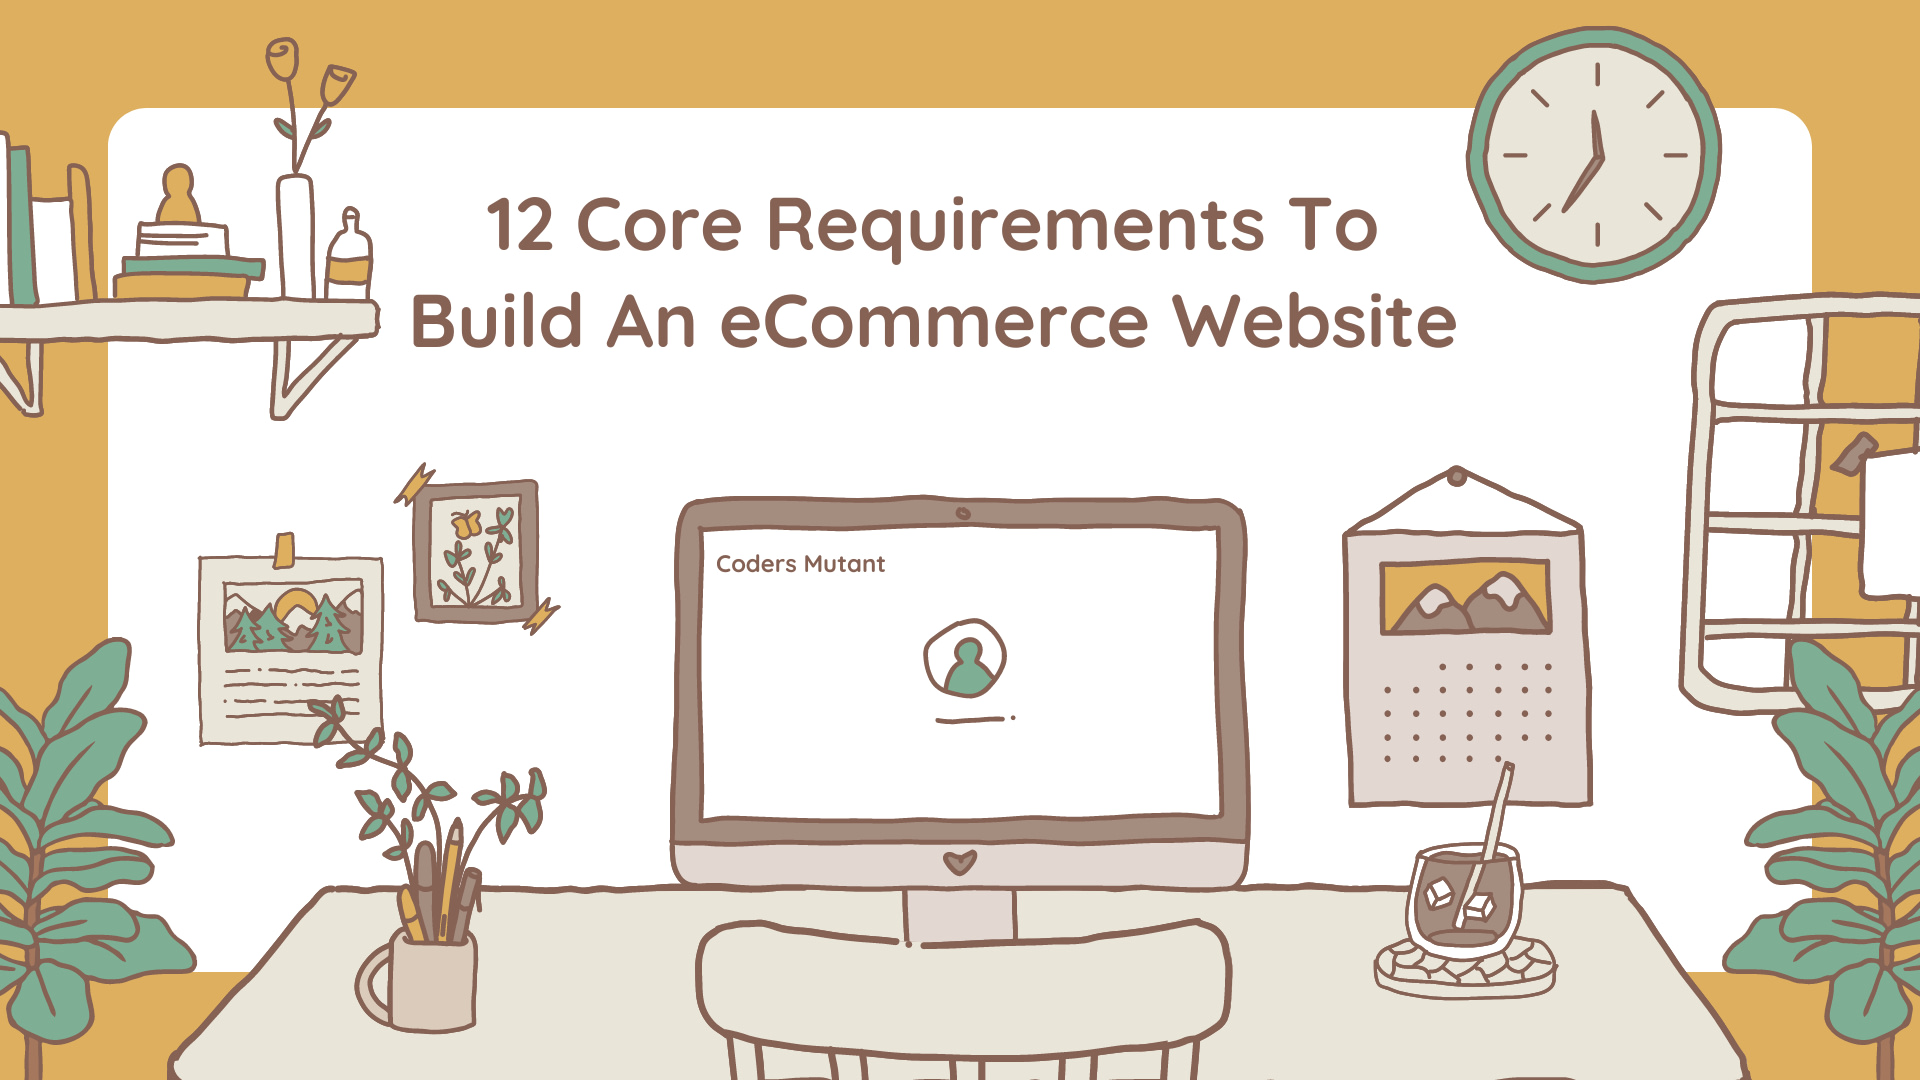 12 Core Requirements To Build An eCommerce Website